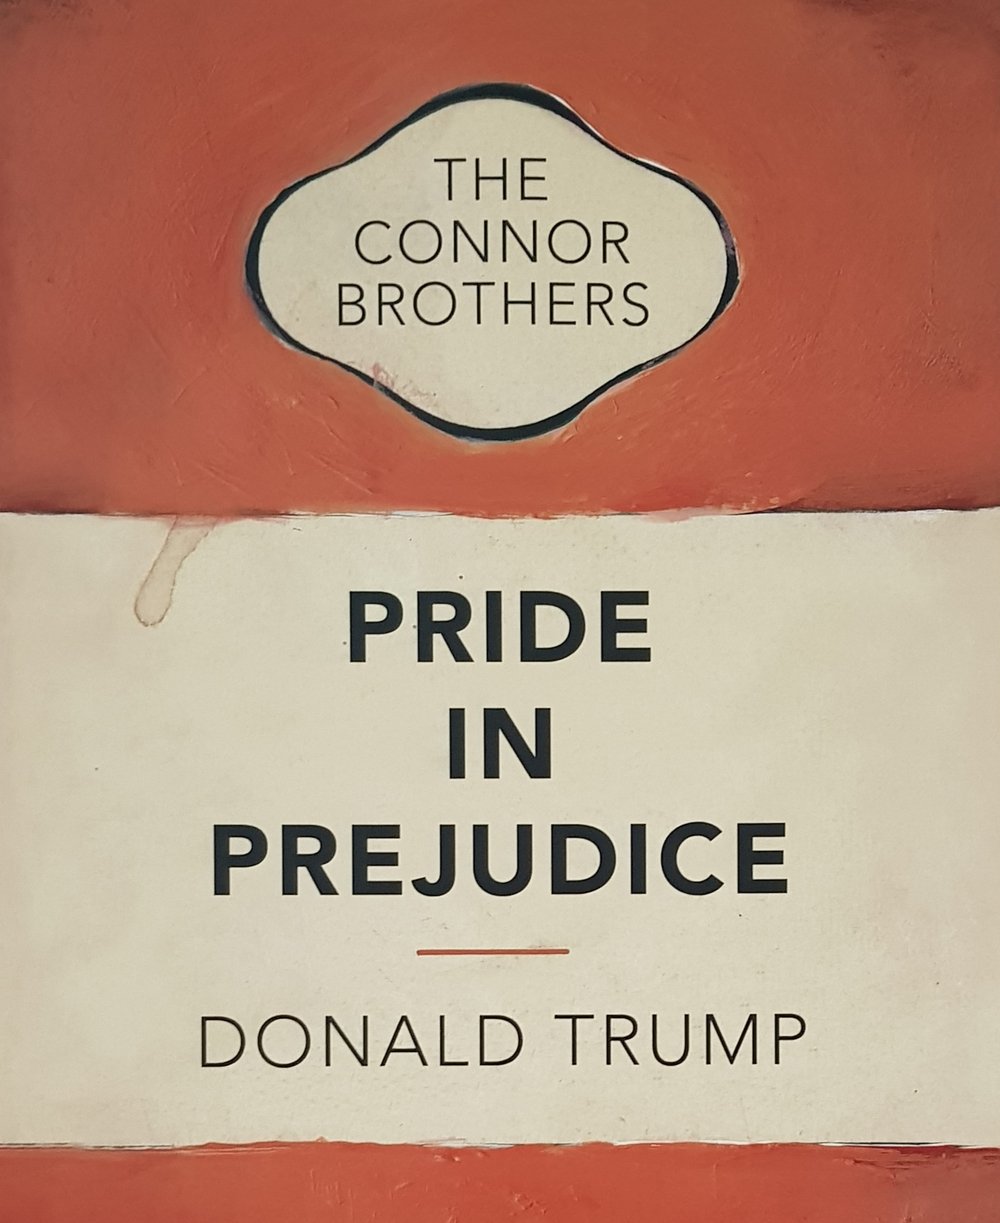 THE CONNOR BROTHERS - "PRIDE IN PREJUDICE" - LIMITED EDITION 35 - 50CM X 75CM